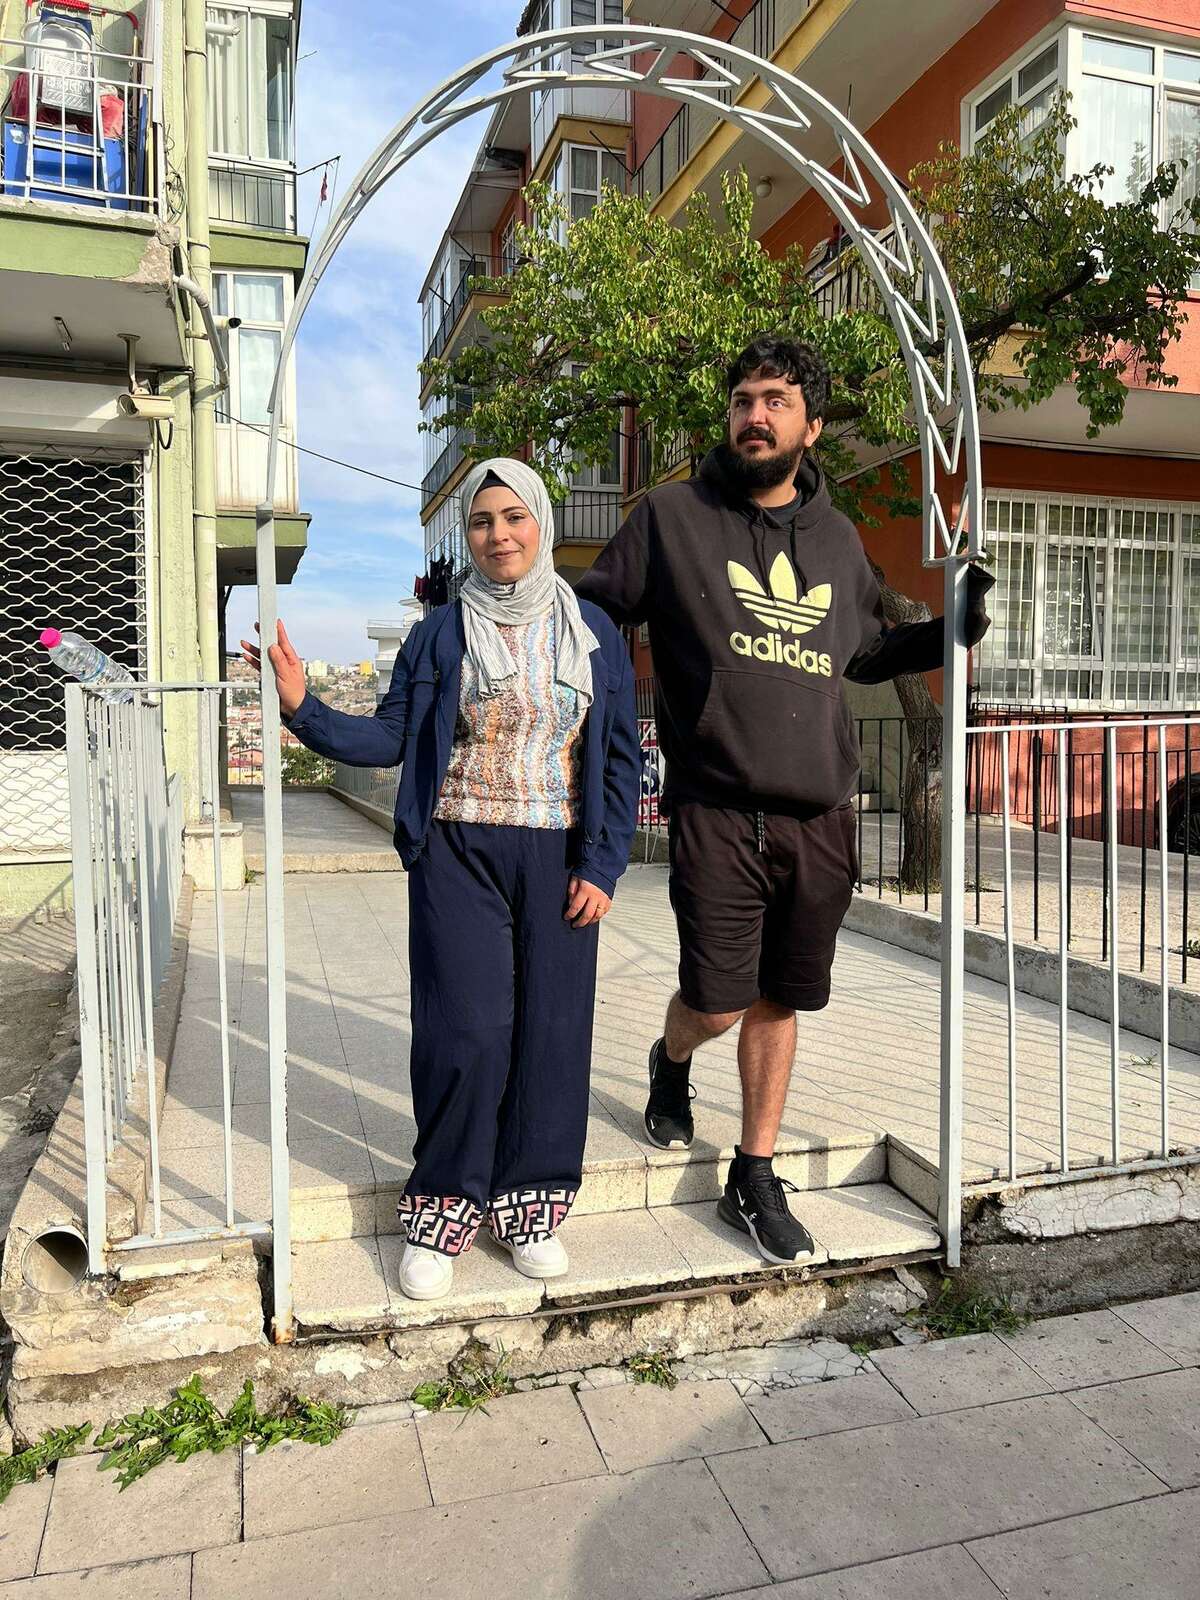 Saleh Khalaf, 28, and Fatima Al-Adhmawee, 23, have been married since 2017 — and are trying to close the distance between them.  Khalaf lives in Oakland and has experienced extreme delays while trying to get his wife, who lives in Iraq, a visa.  They're now stuck in limbo in Turkey, waiting for an overdue response from the US